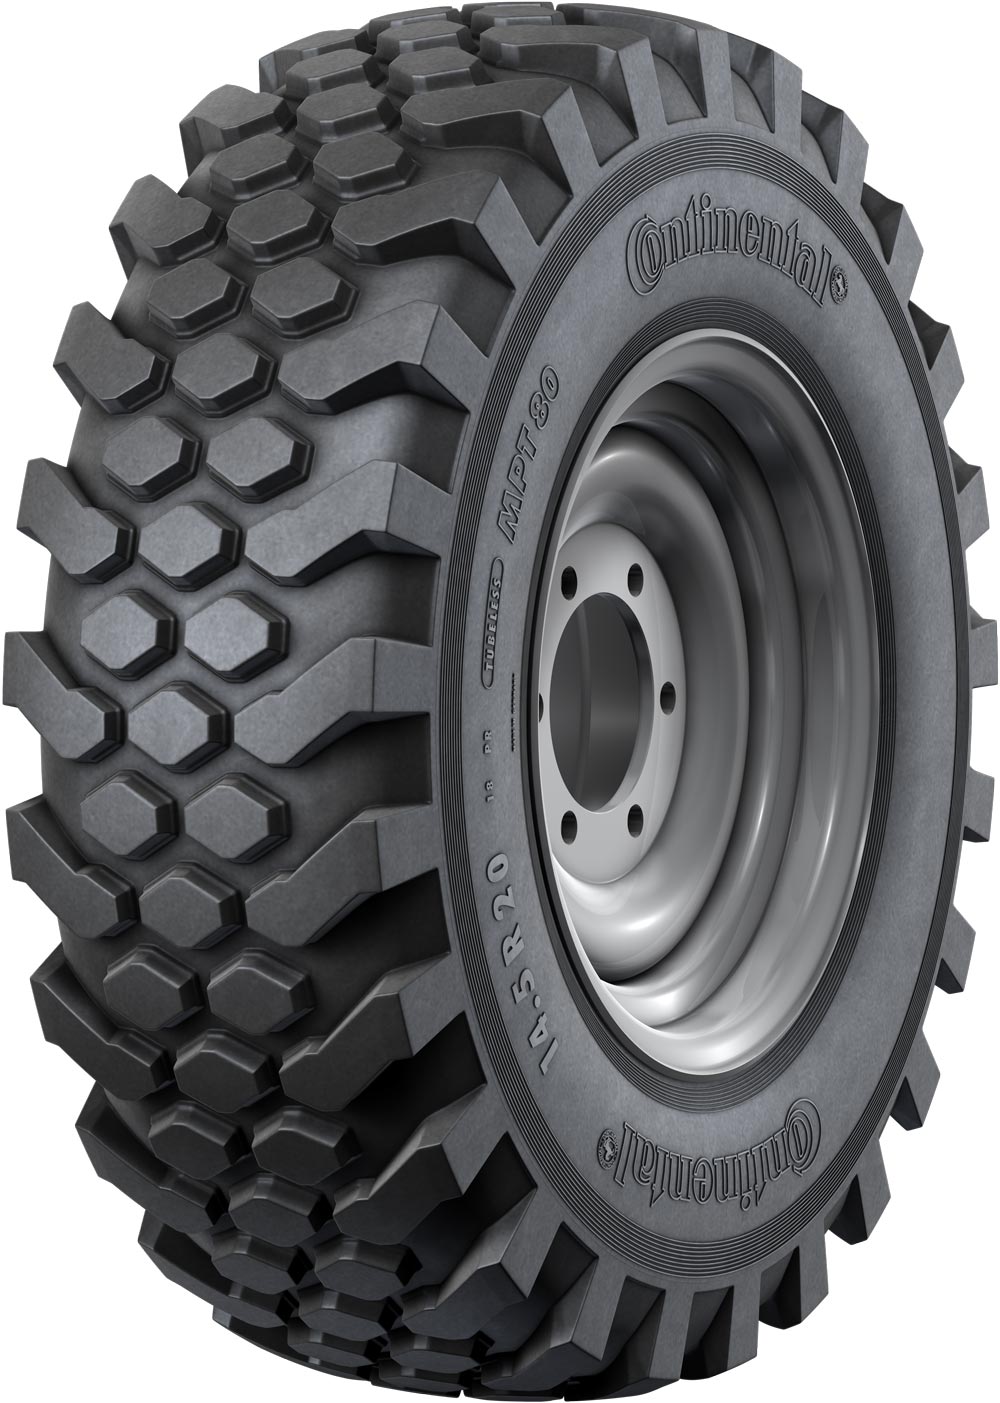 product_type-industrial_tires CONTINENTAL MPT80 10PR TL 10.5 R20 J